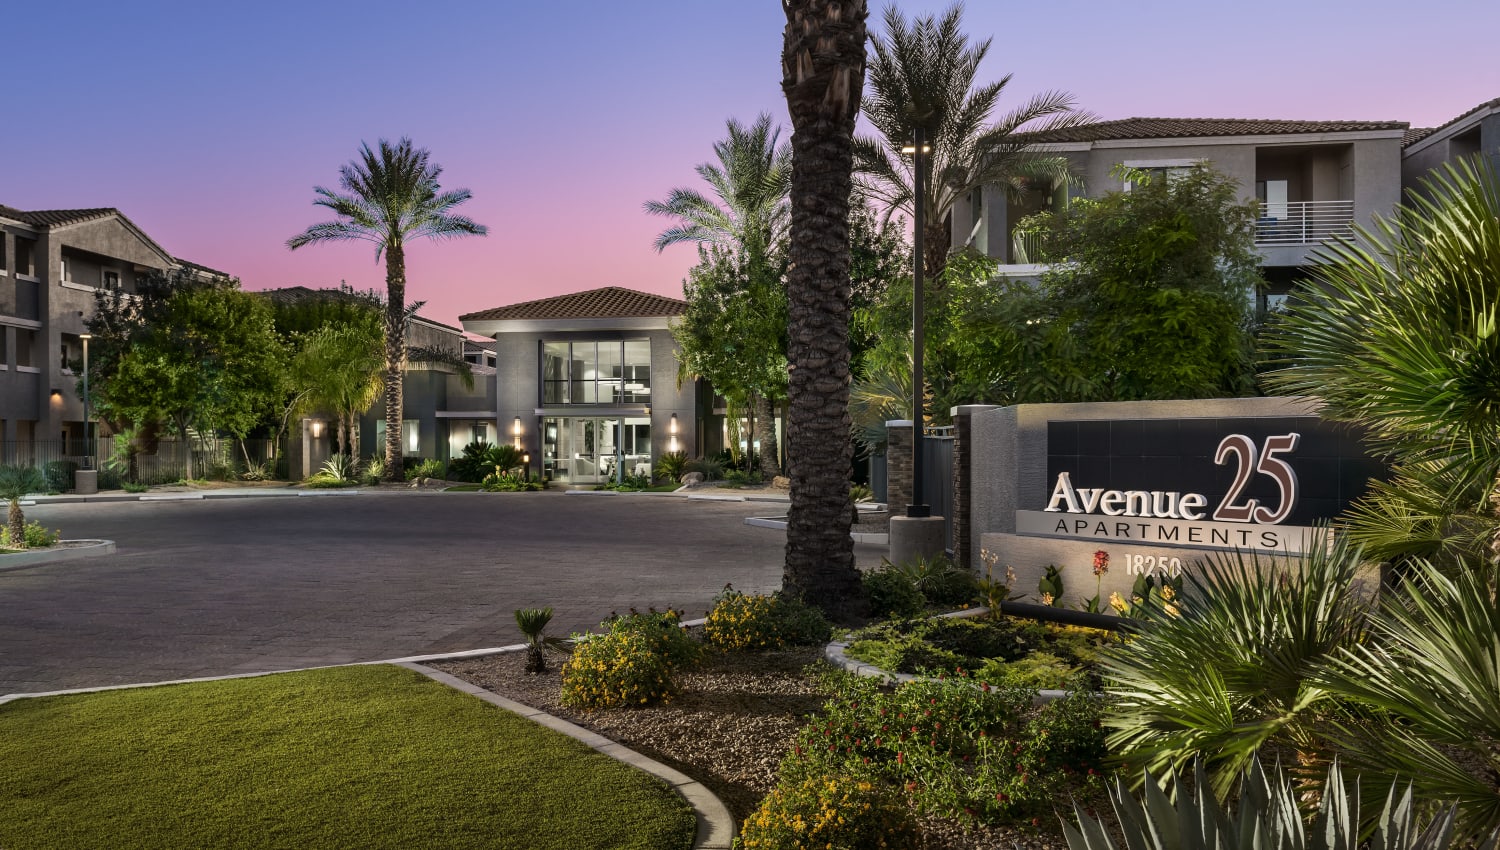 Main entrance and front of the clubhouse at Avenue 25 in Phoenix, Arizona